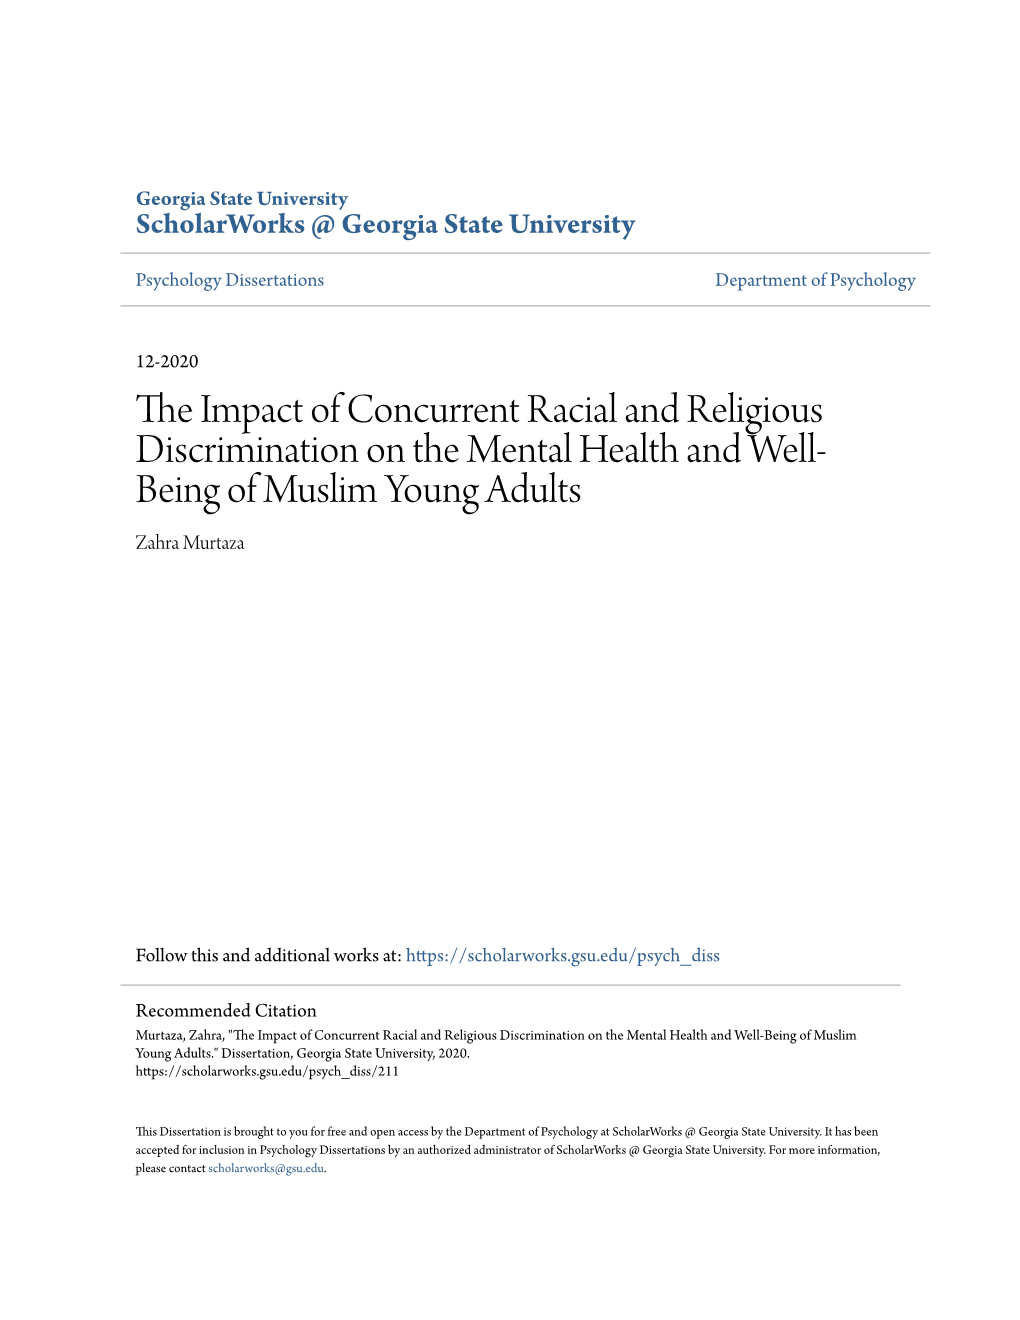 The Impact of Concurrent Racial and Religious Discrimination on The